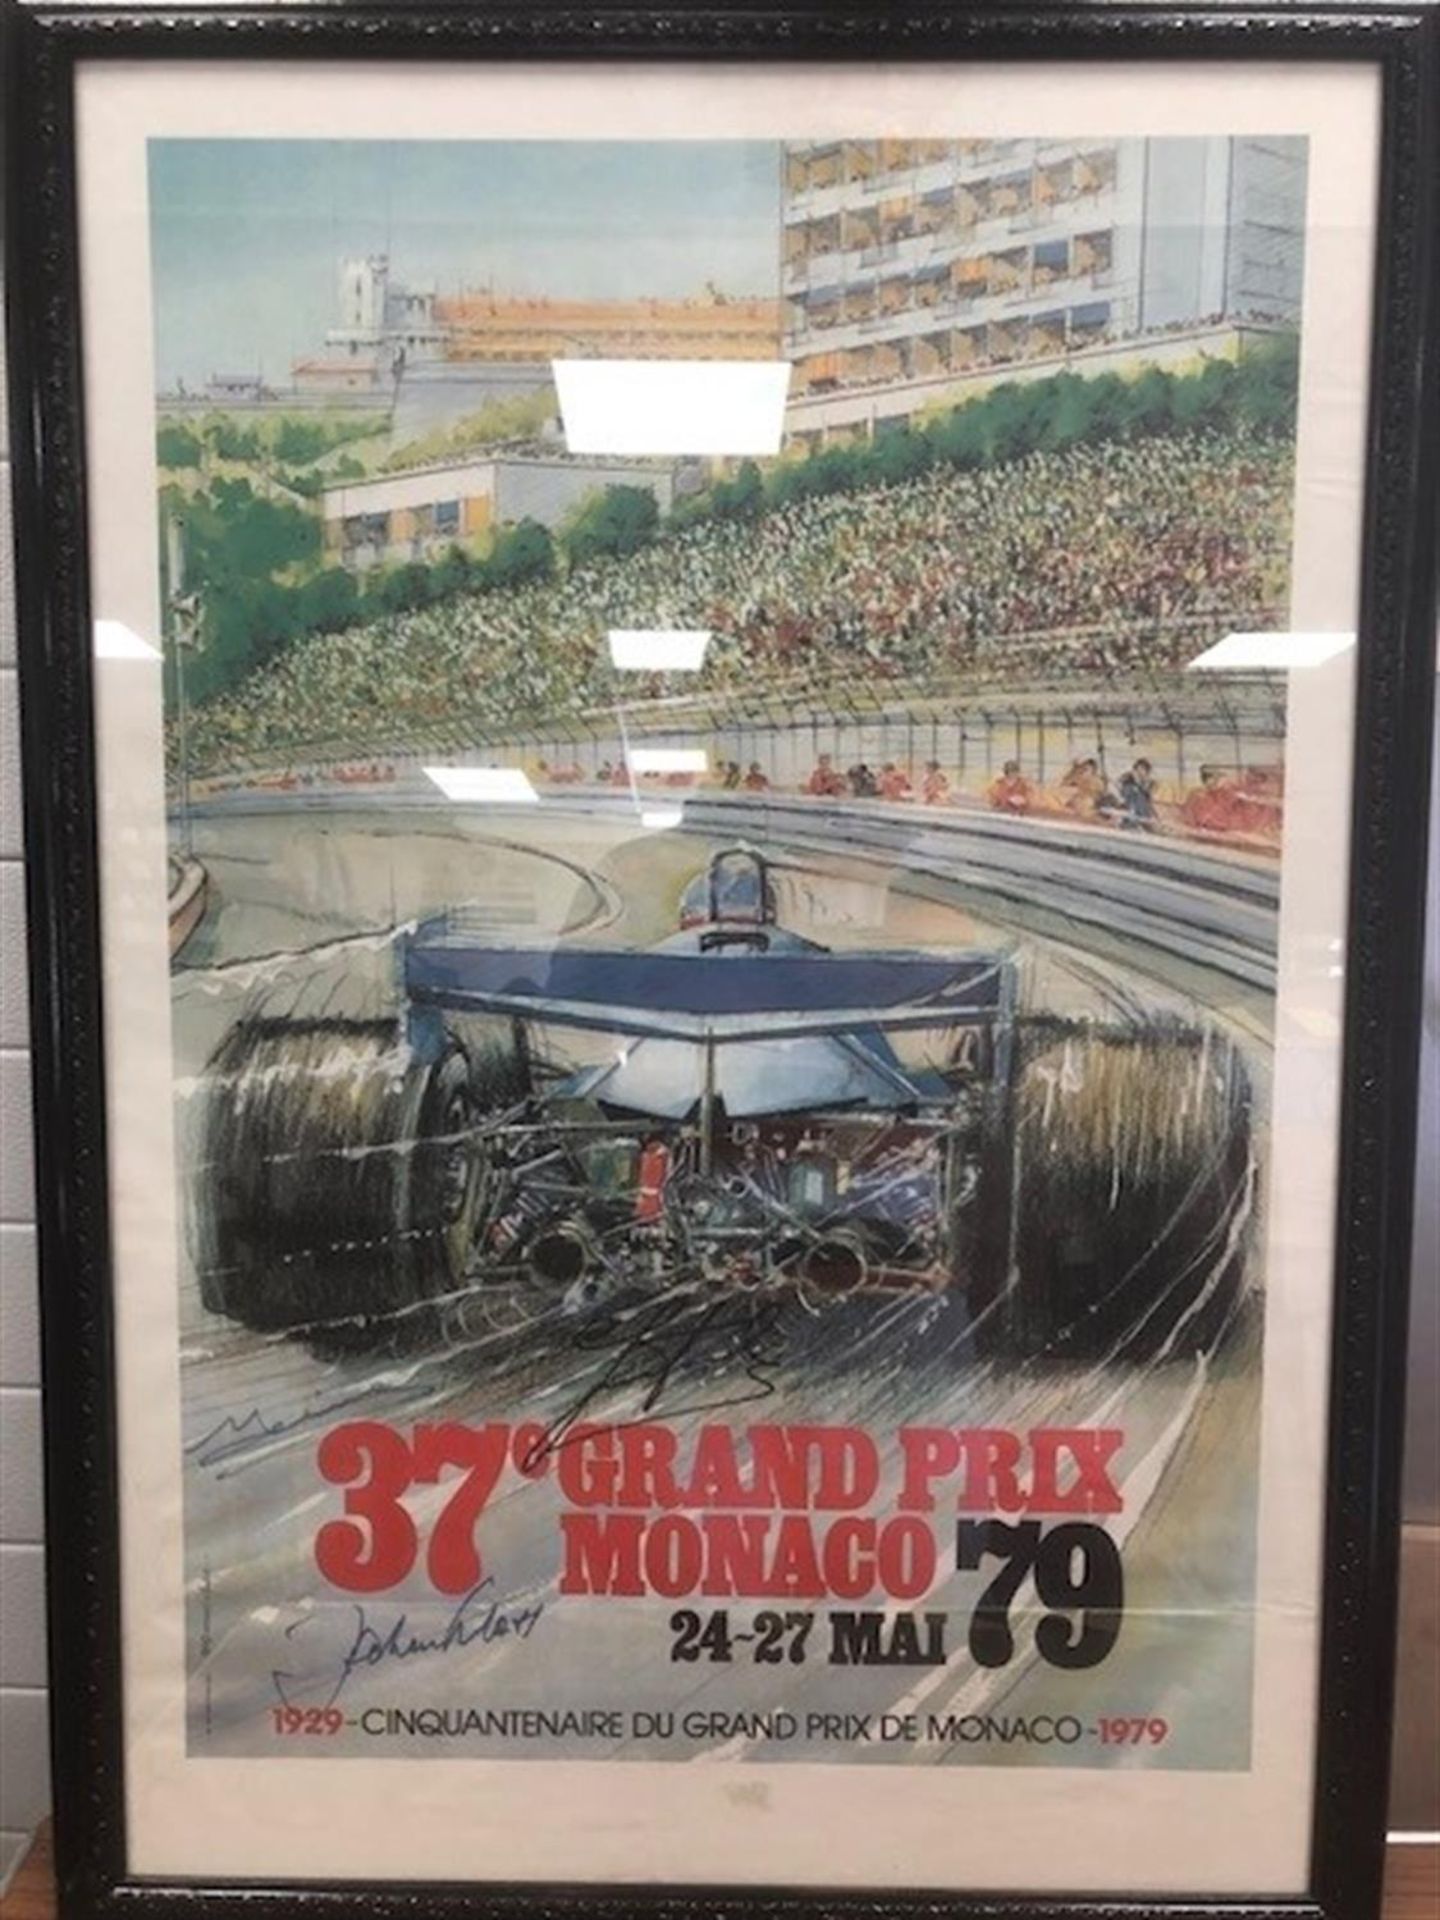 An Original Poster for the 37th Monaco Grand Prix, 24th-27th May 1979